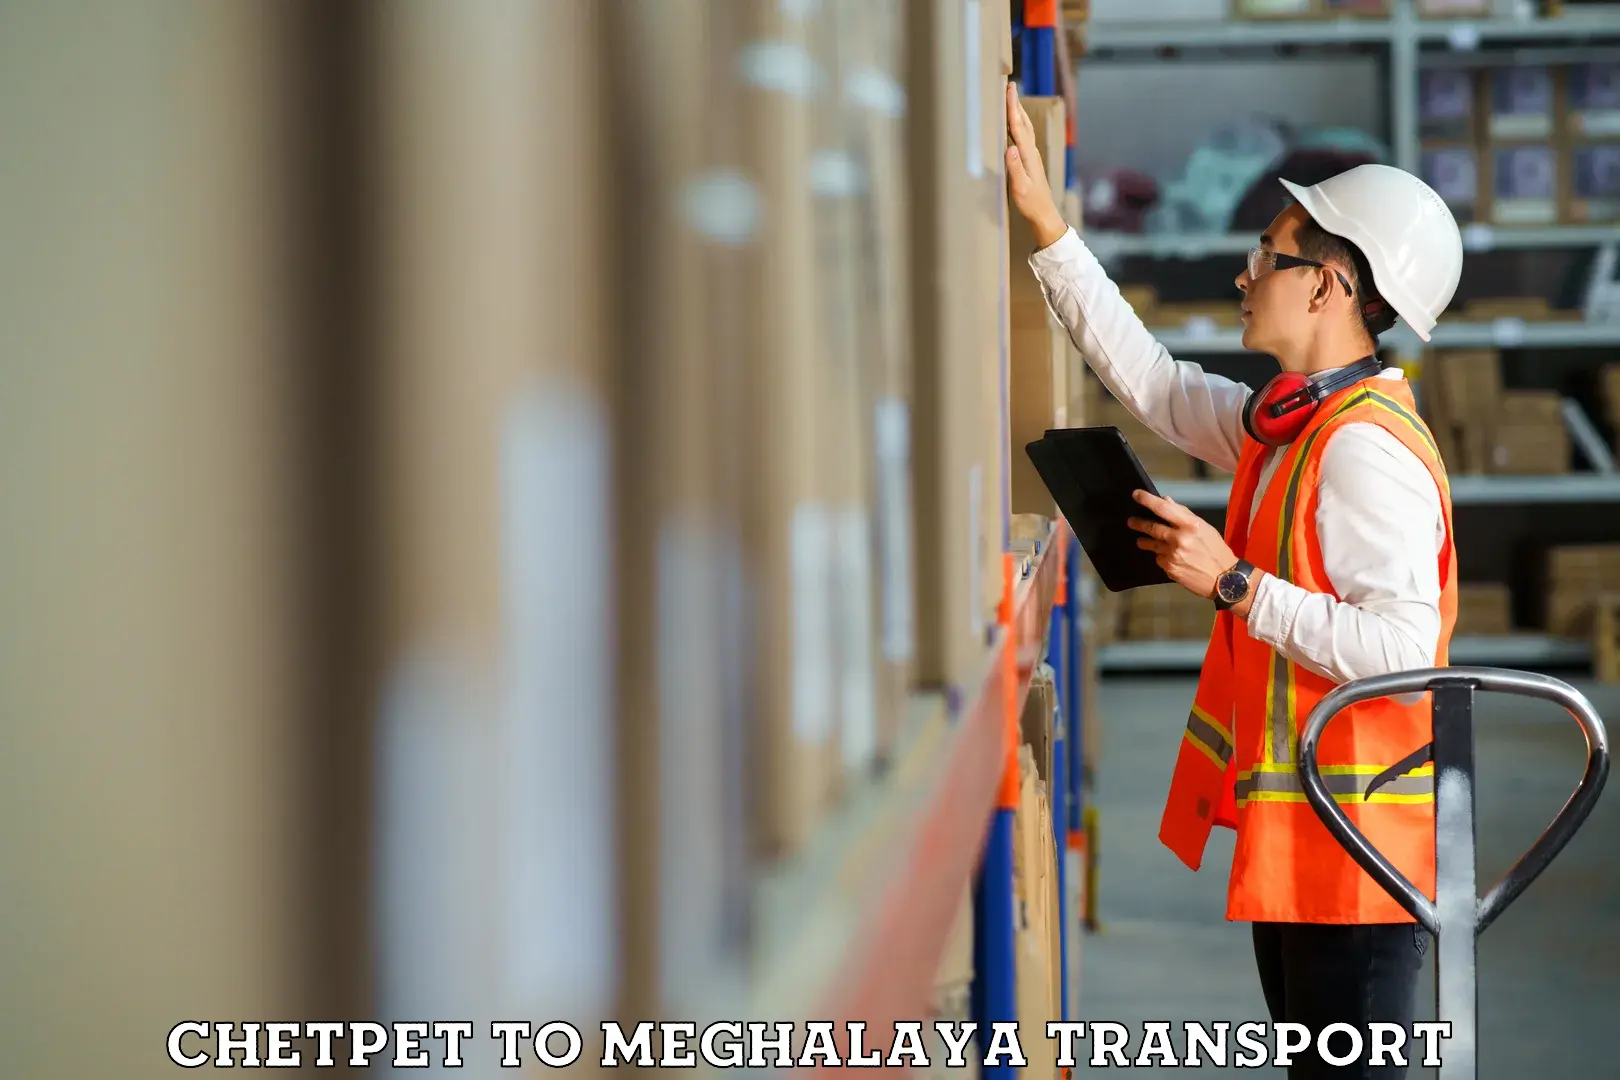 Container transport service Chetpet to Meghalaya